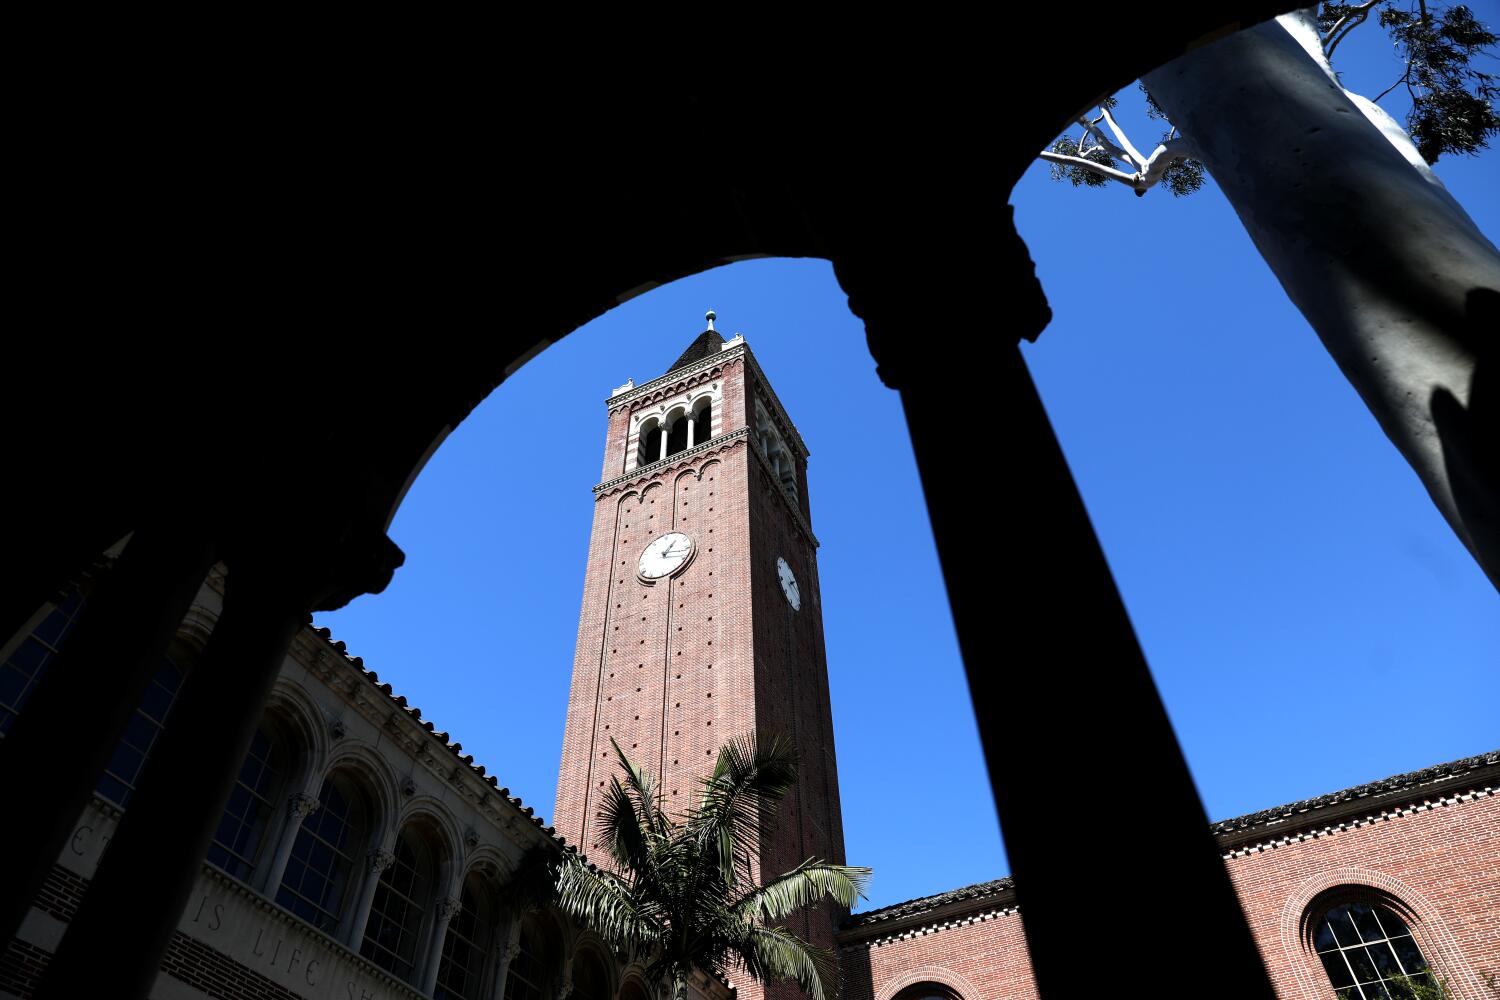 Image for display with article titled After Cancelling Commencement, USC Will Host Event at L.A. Coliseum, Rolls Out New Campus Security